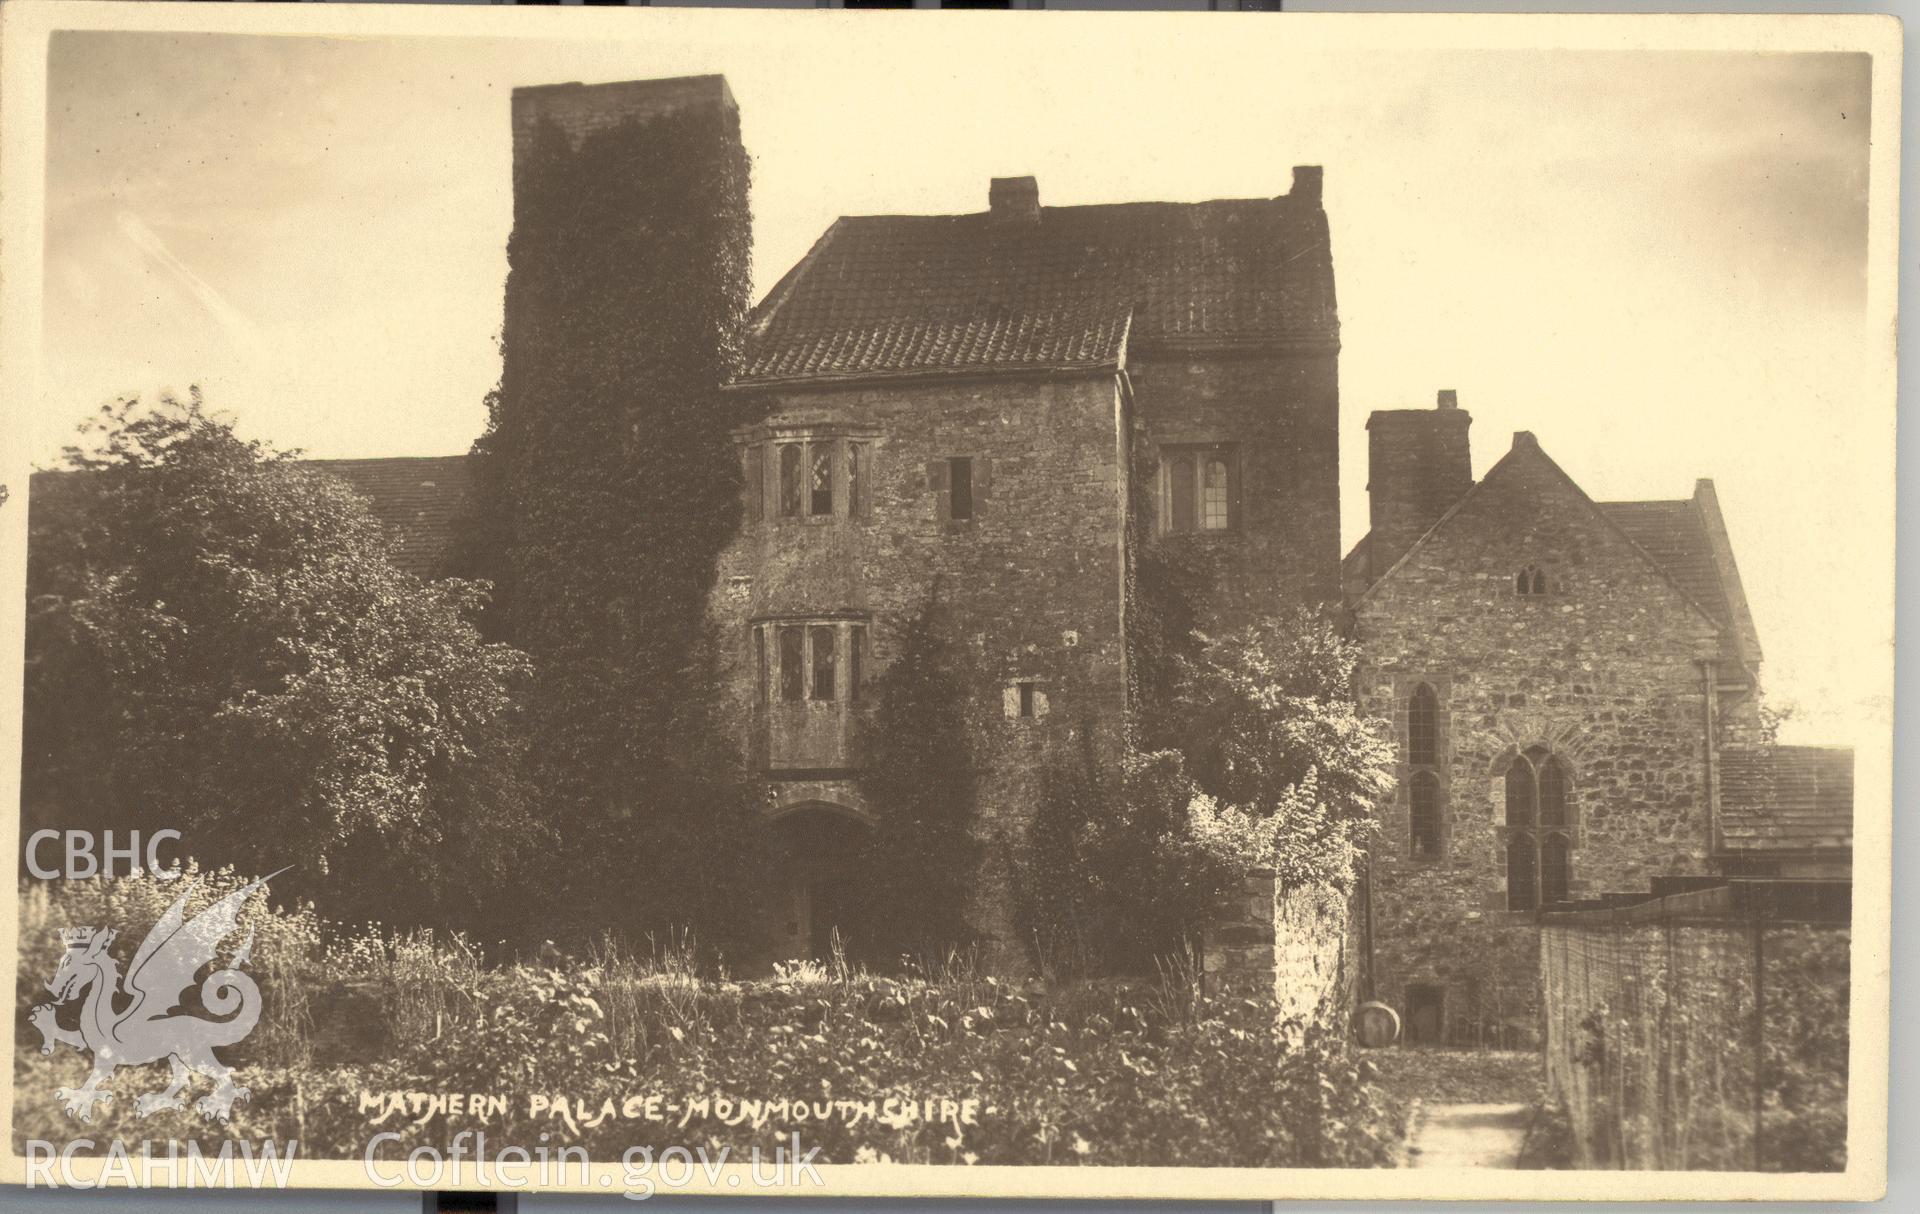 Digitised postcard image of Mathern Palace, W.A. Call, the County Studio, Monmouth. Produced by Parks and Gardens Data Services, from an original item in the Peter Davis Collection at Parks and Gardens UK. We hold only web-resolution images of this collection, suitable for viewing on screen and for research purposes only. We do not hold the original images, or publication quality scans.